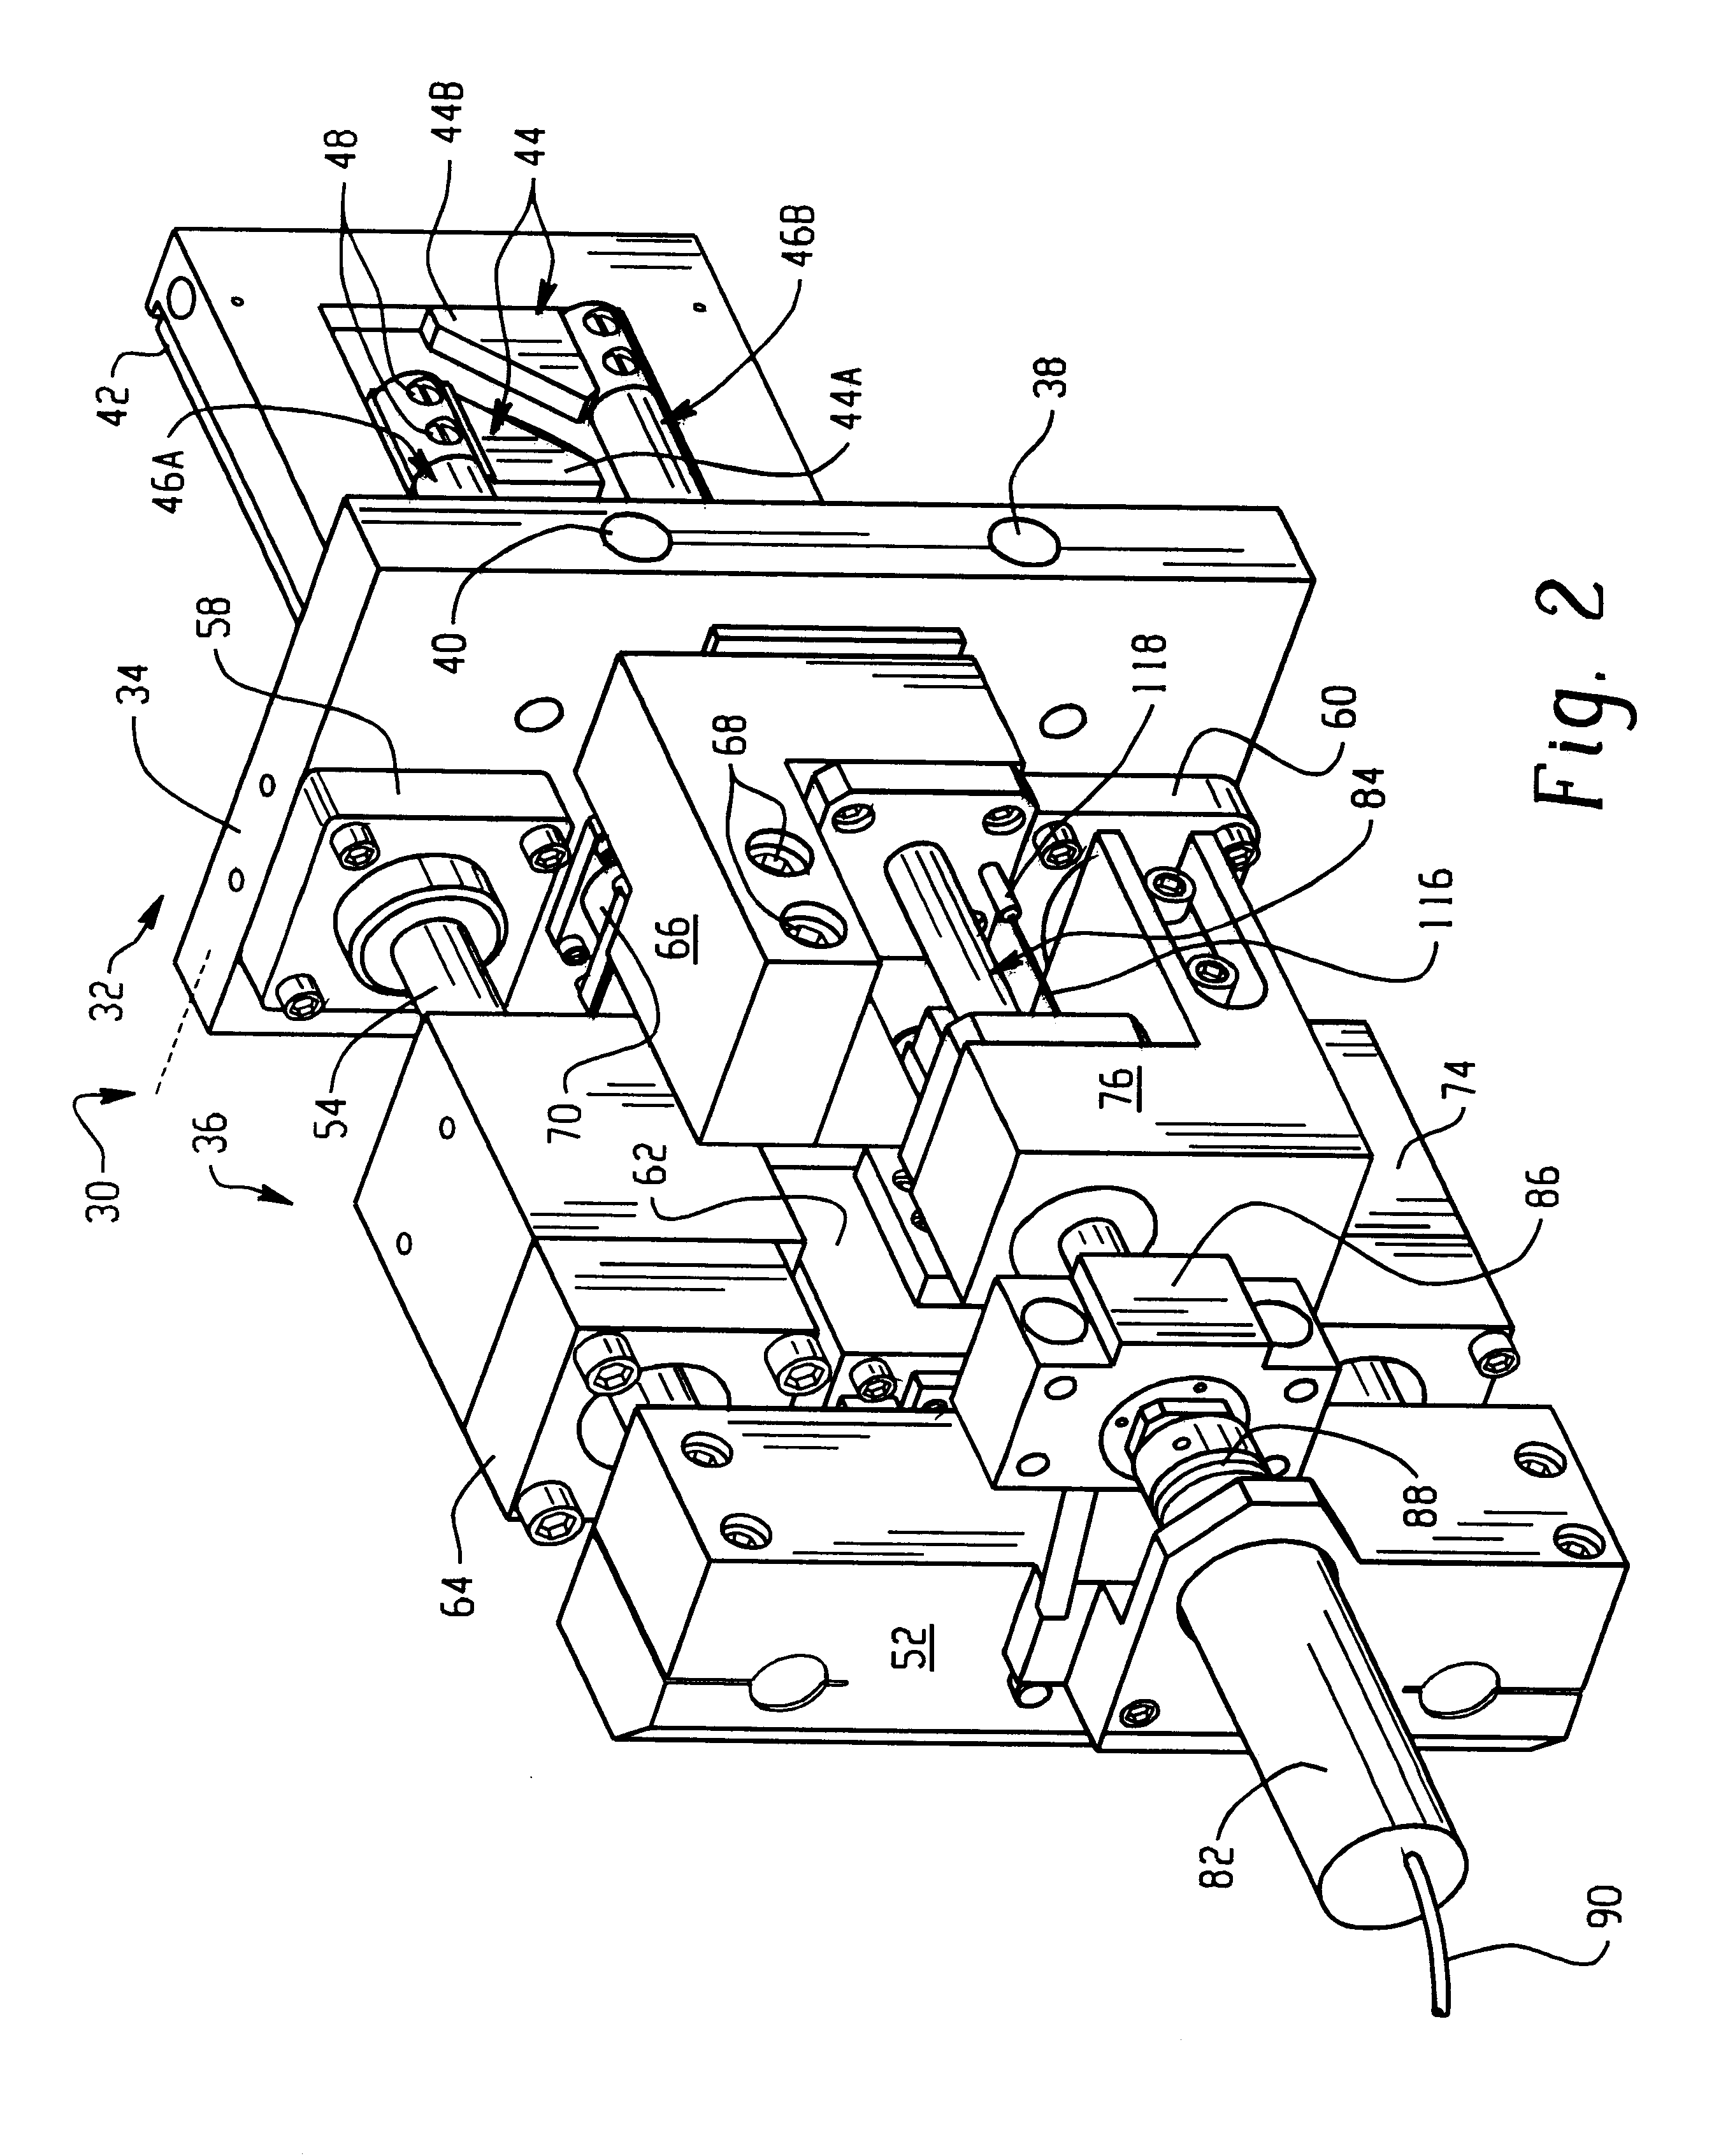 Continuously variable aperture for high-energy ion implanter